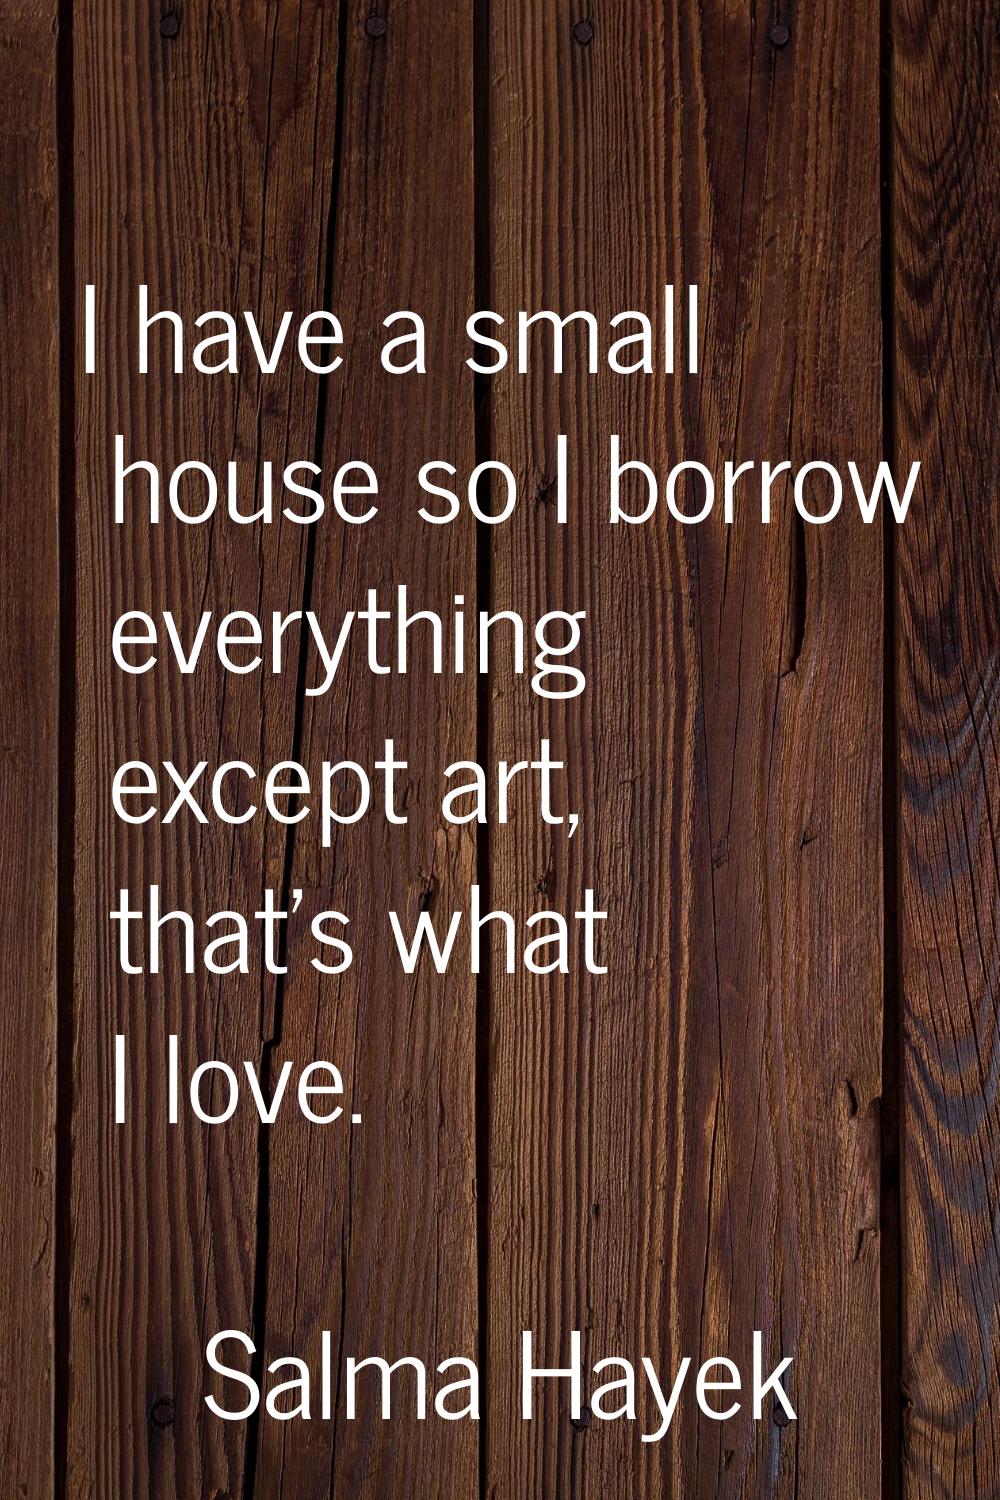 I have a small house so I borrow everything except art, that's what I love.